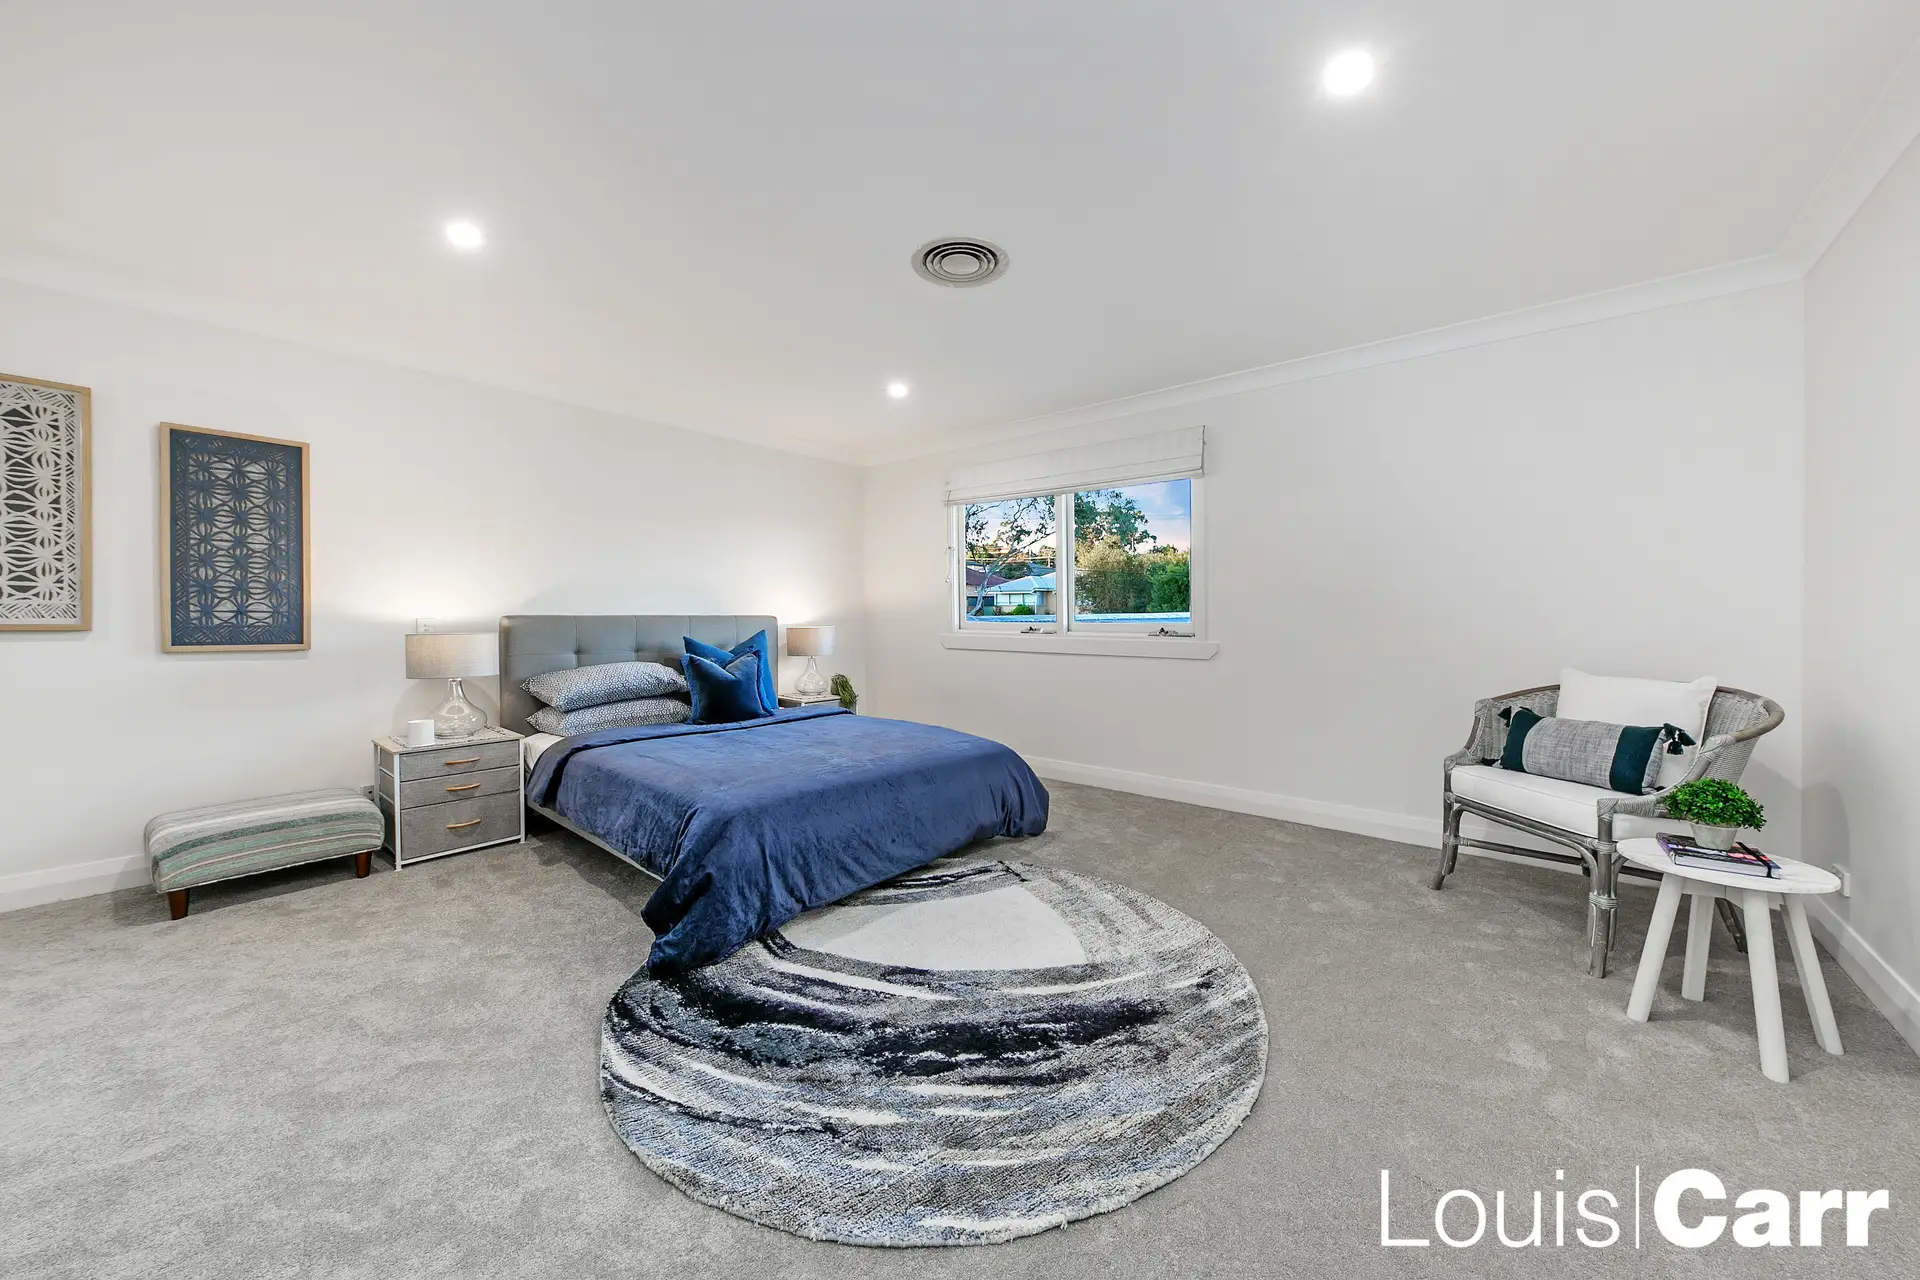 Photo #9: 94 Tamboura Avenue, Baulkham Hills - Sold by Louis Carr Real Estate